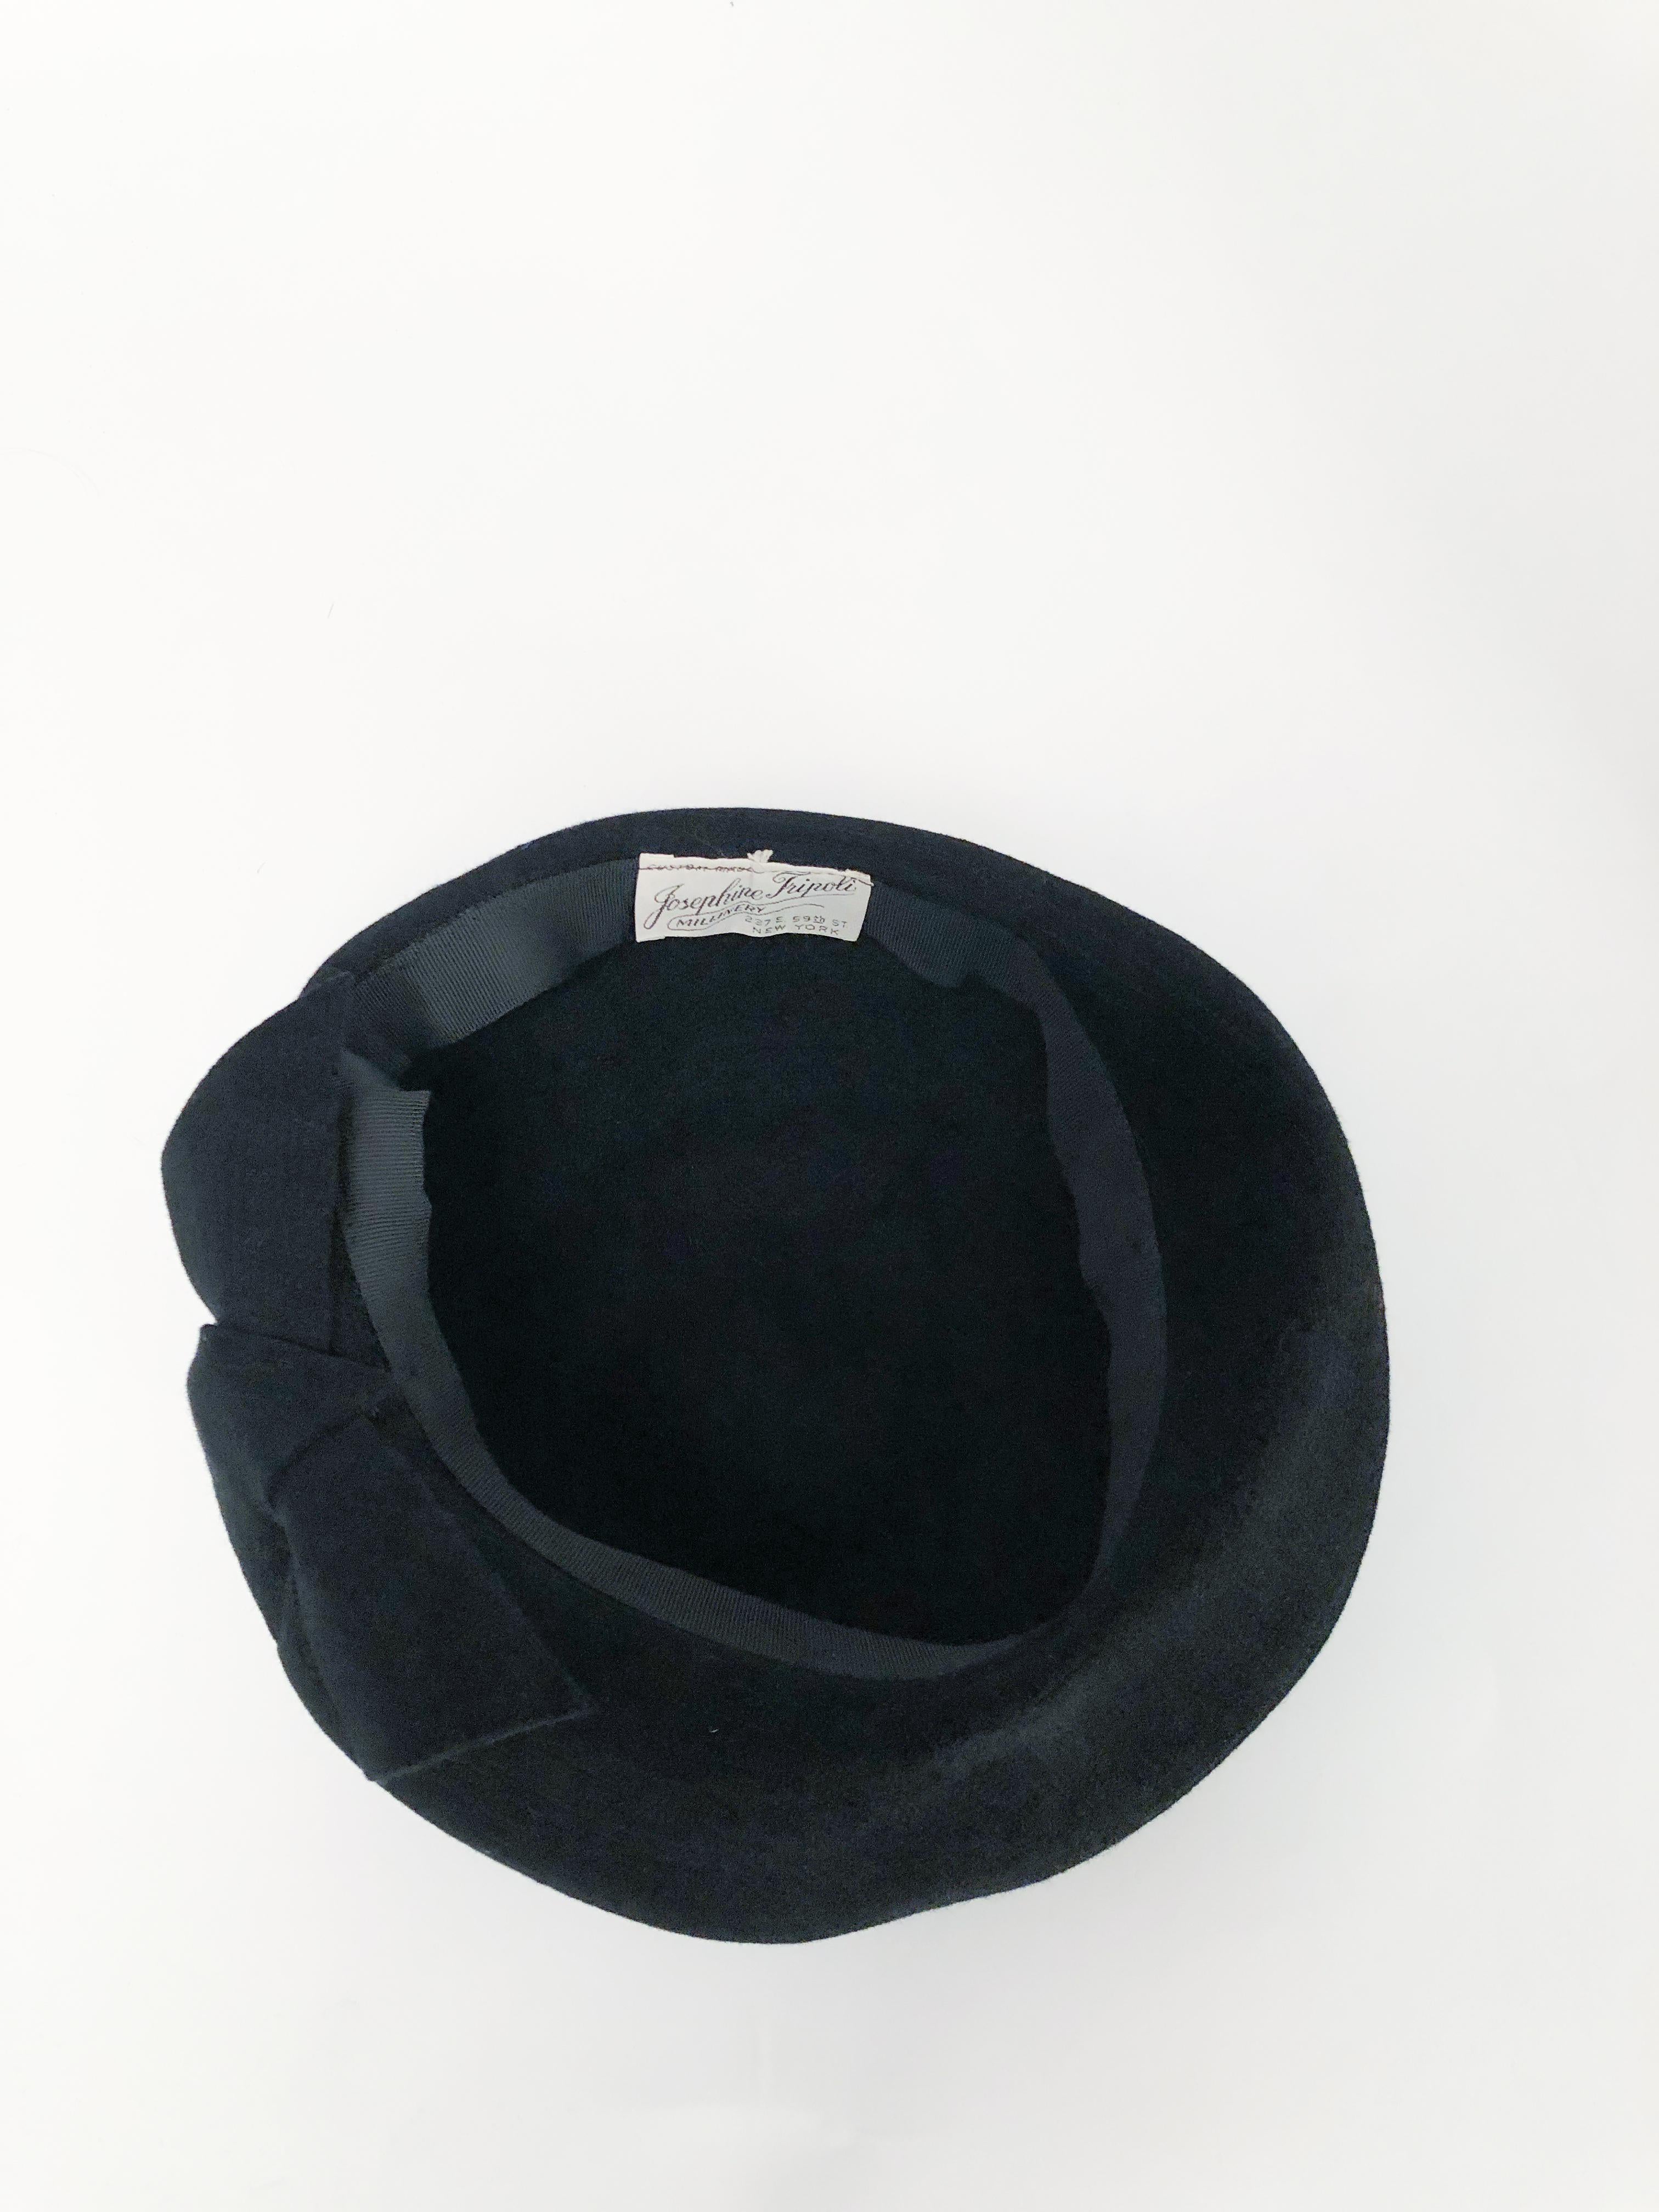 1940s Black Felt Hat with Double Bow and Top Stitch Pattern For Sale 1